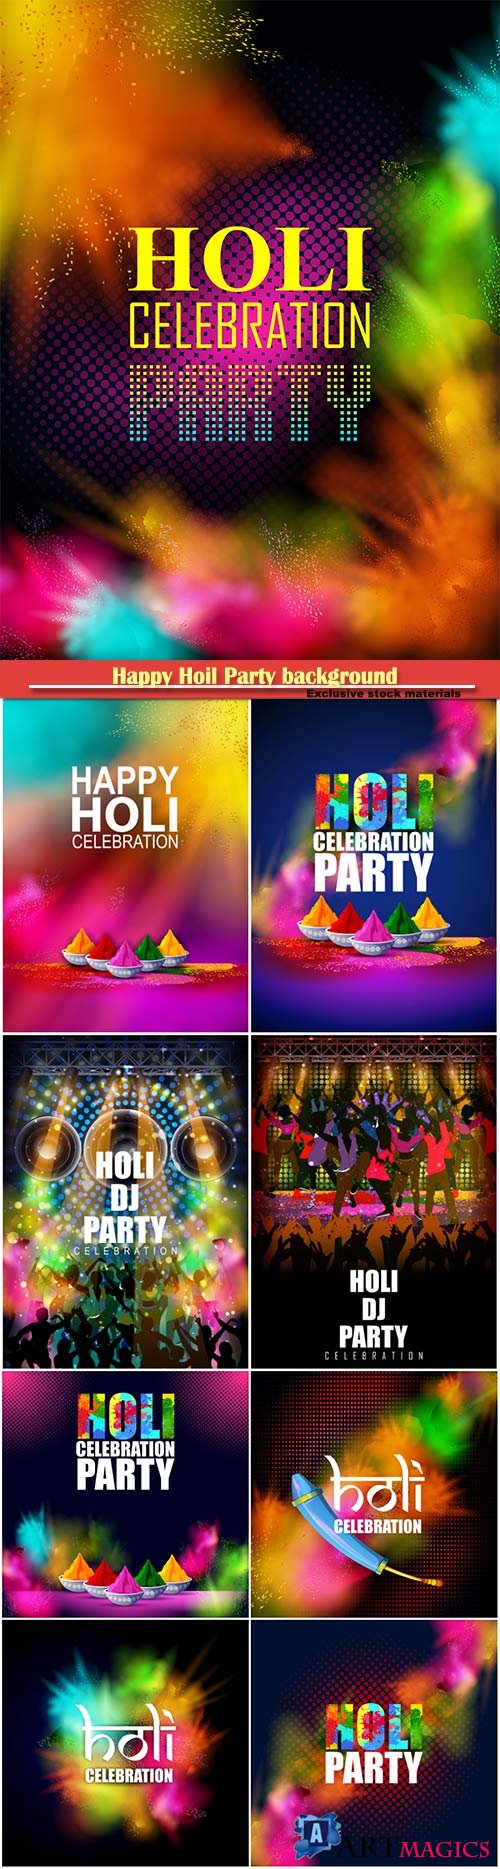 Happy Hoil Party background for festival of colors in India